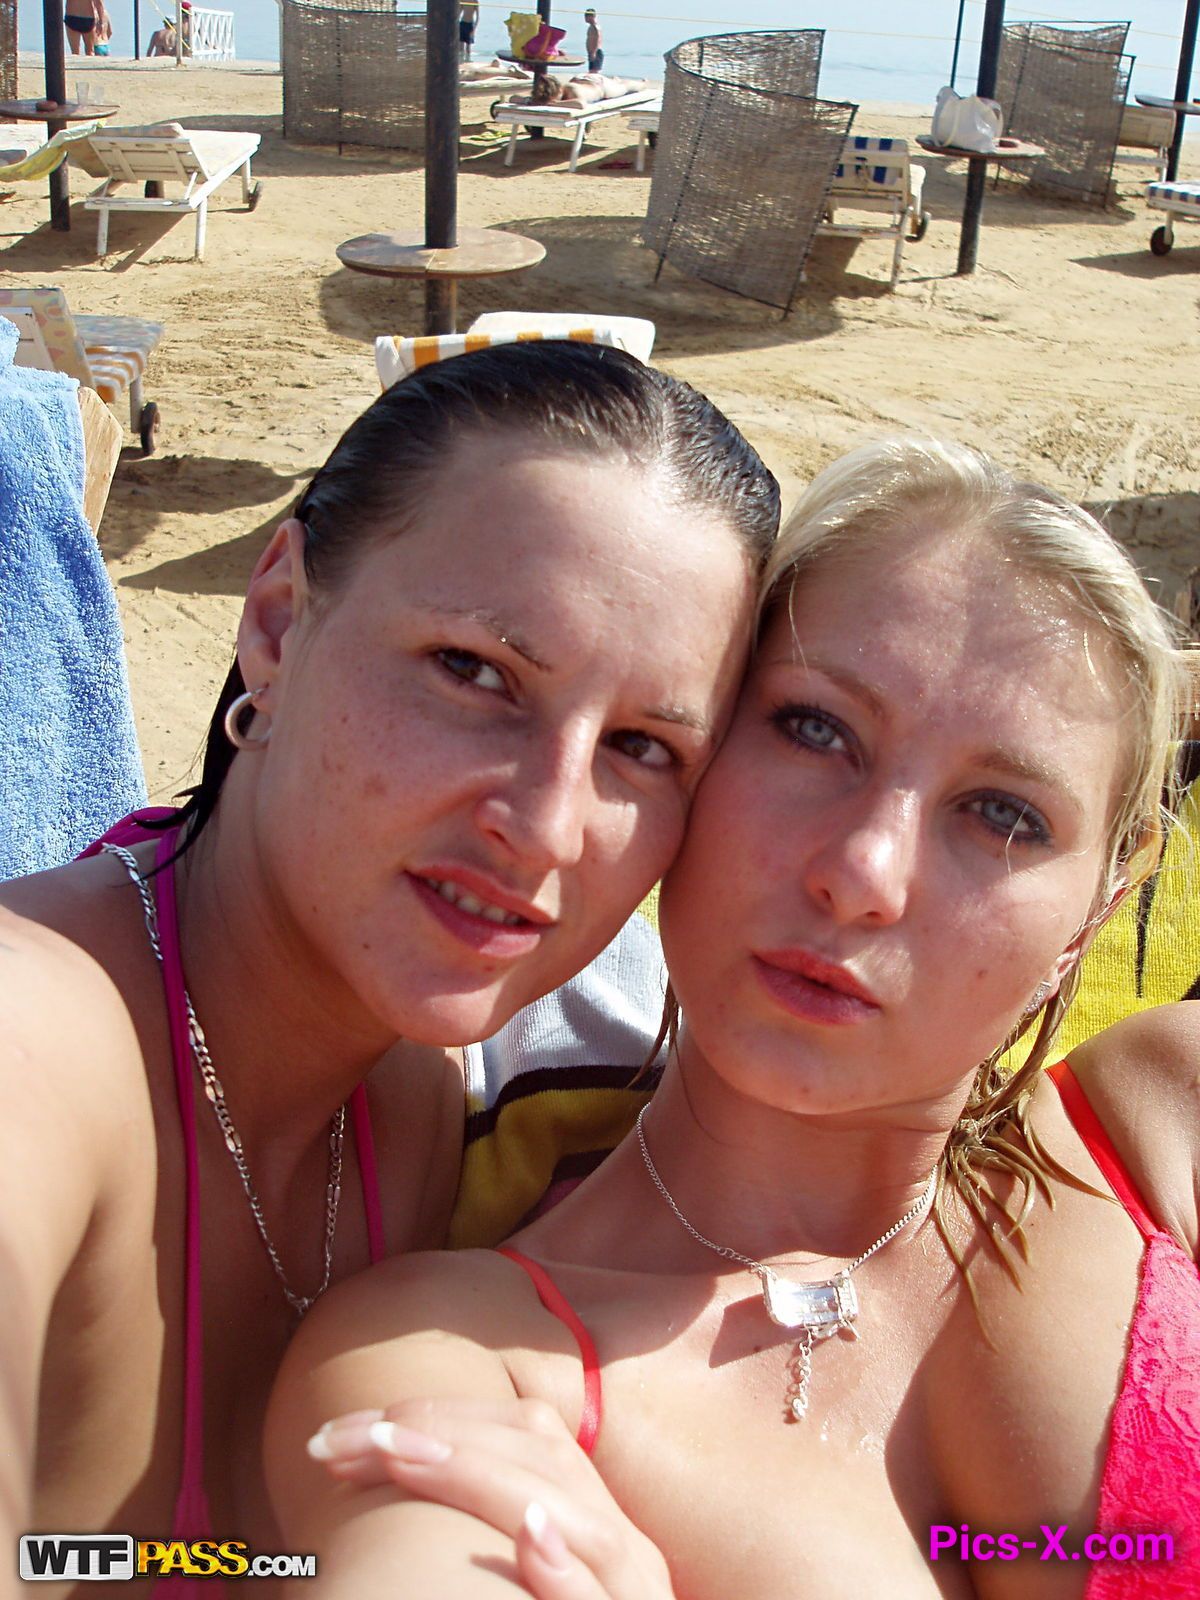 Egypt porn with hot bikini girls: Day 1 - Me and three sexy girls on vacation! - Porn Weekends - Image 58